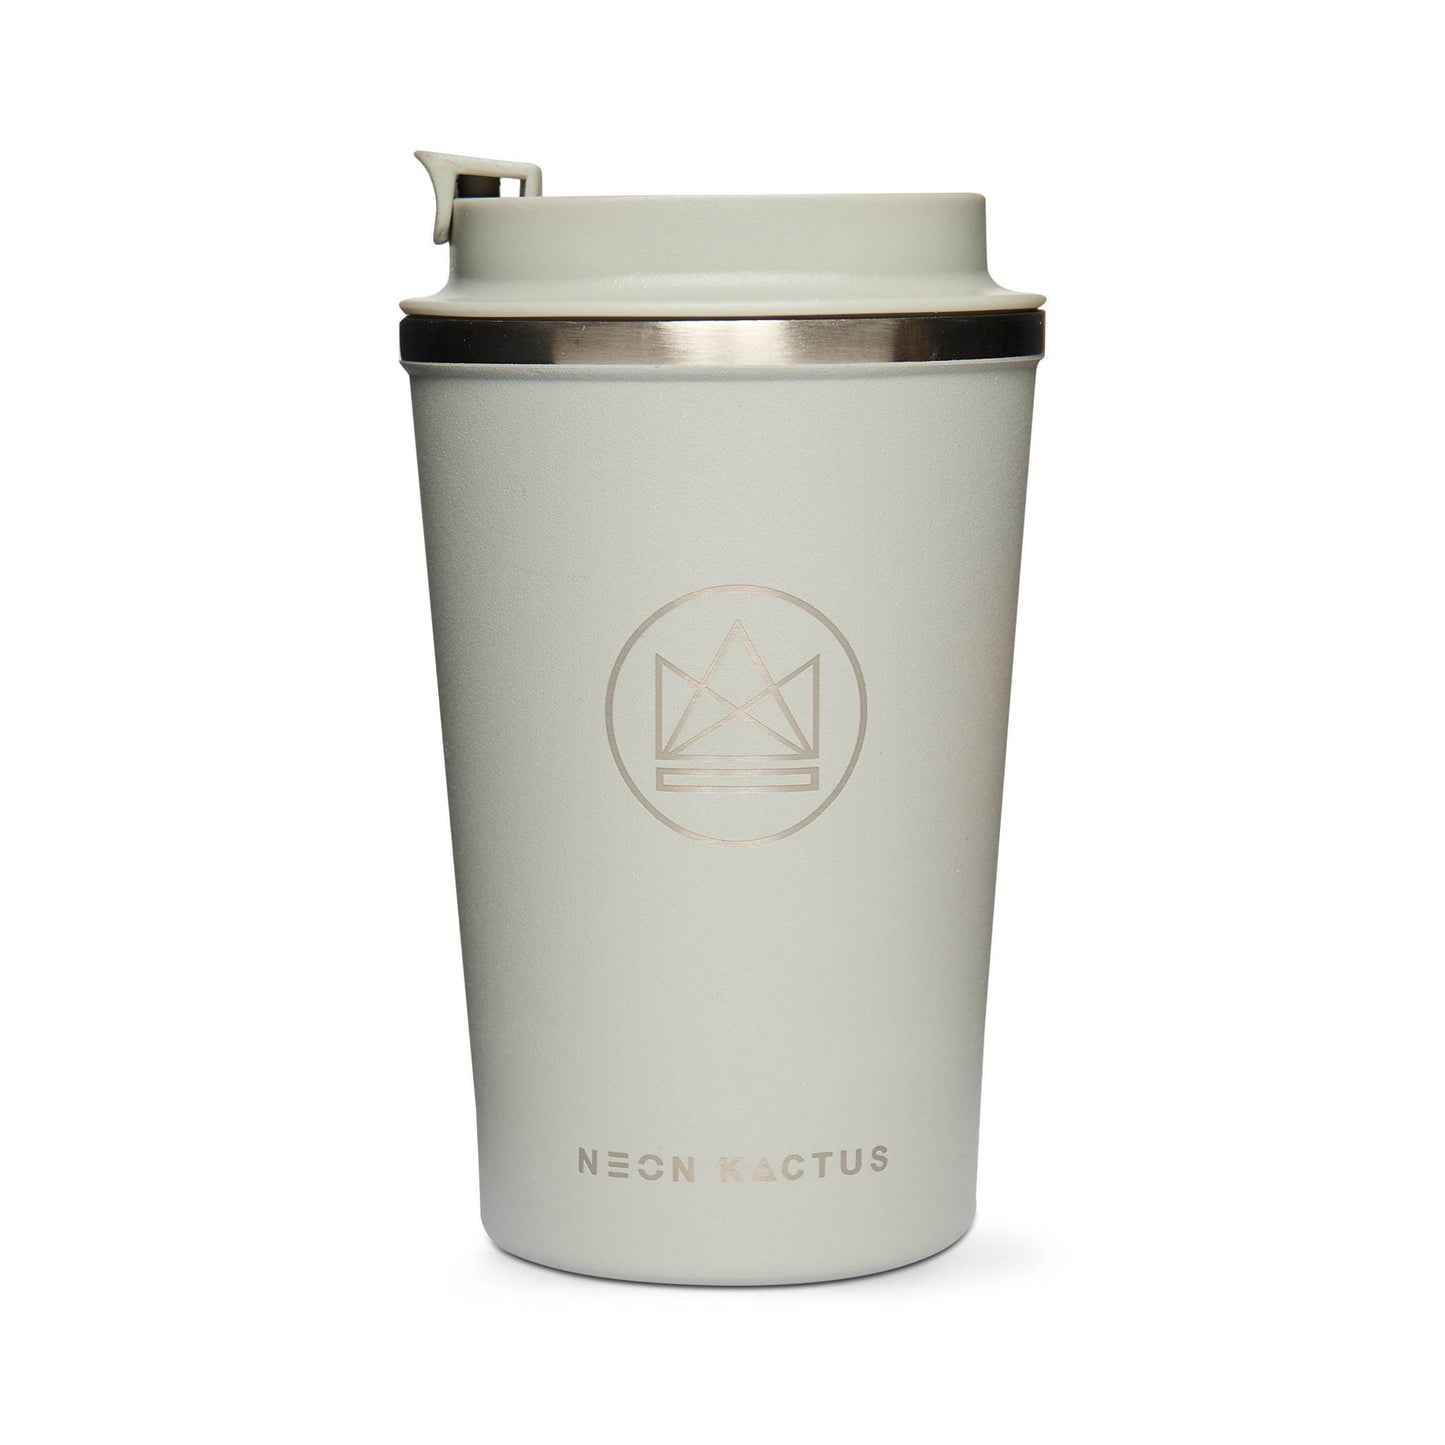 Neon Kactus Coffee Cup Stainless Steel Insulated Coffee Cup - 12oz - Forever Young Grey